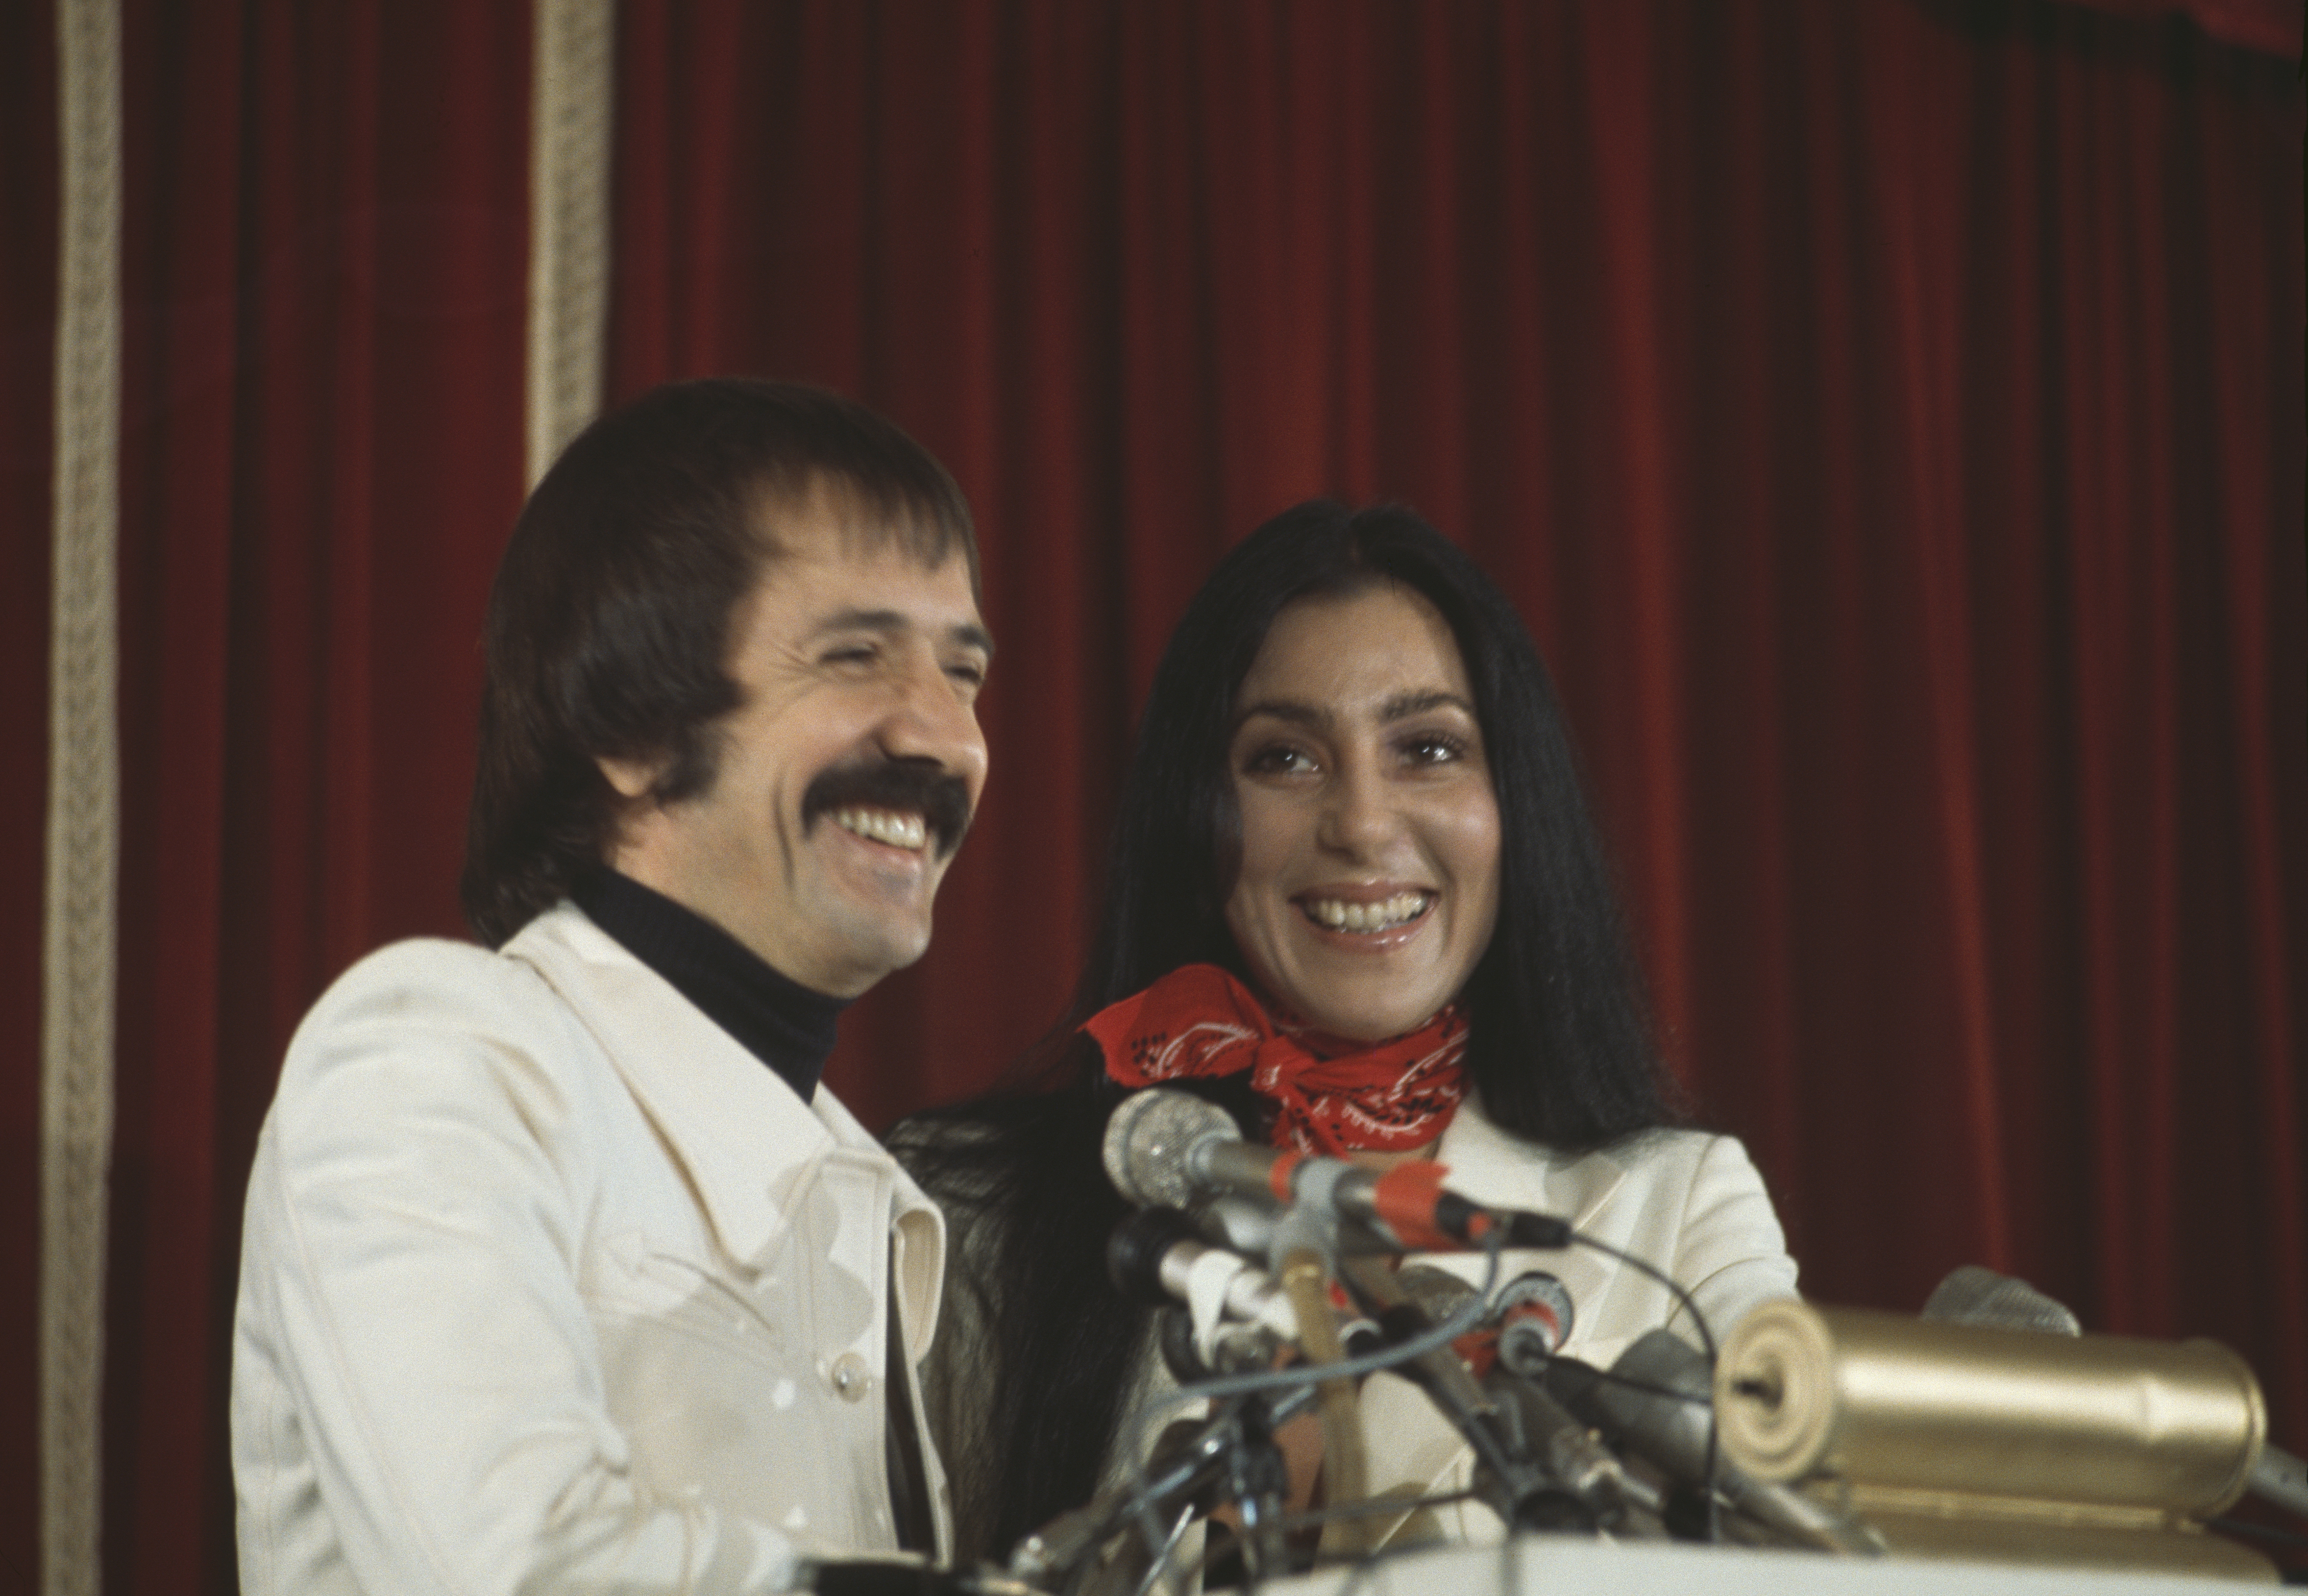 Sonny Bono and Cher in Hollywood, California, December 4, 1975 | Source: Getty Images